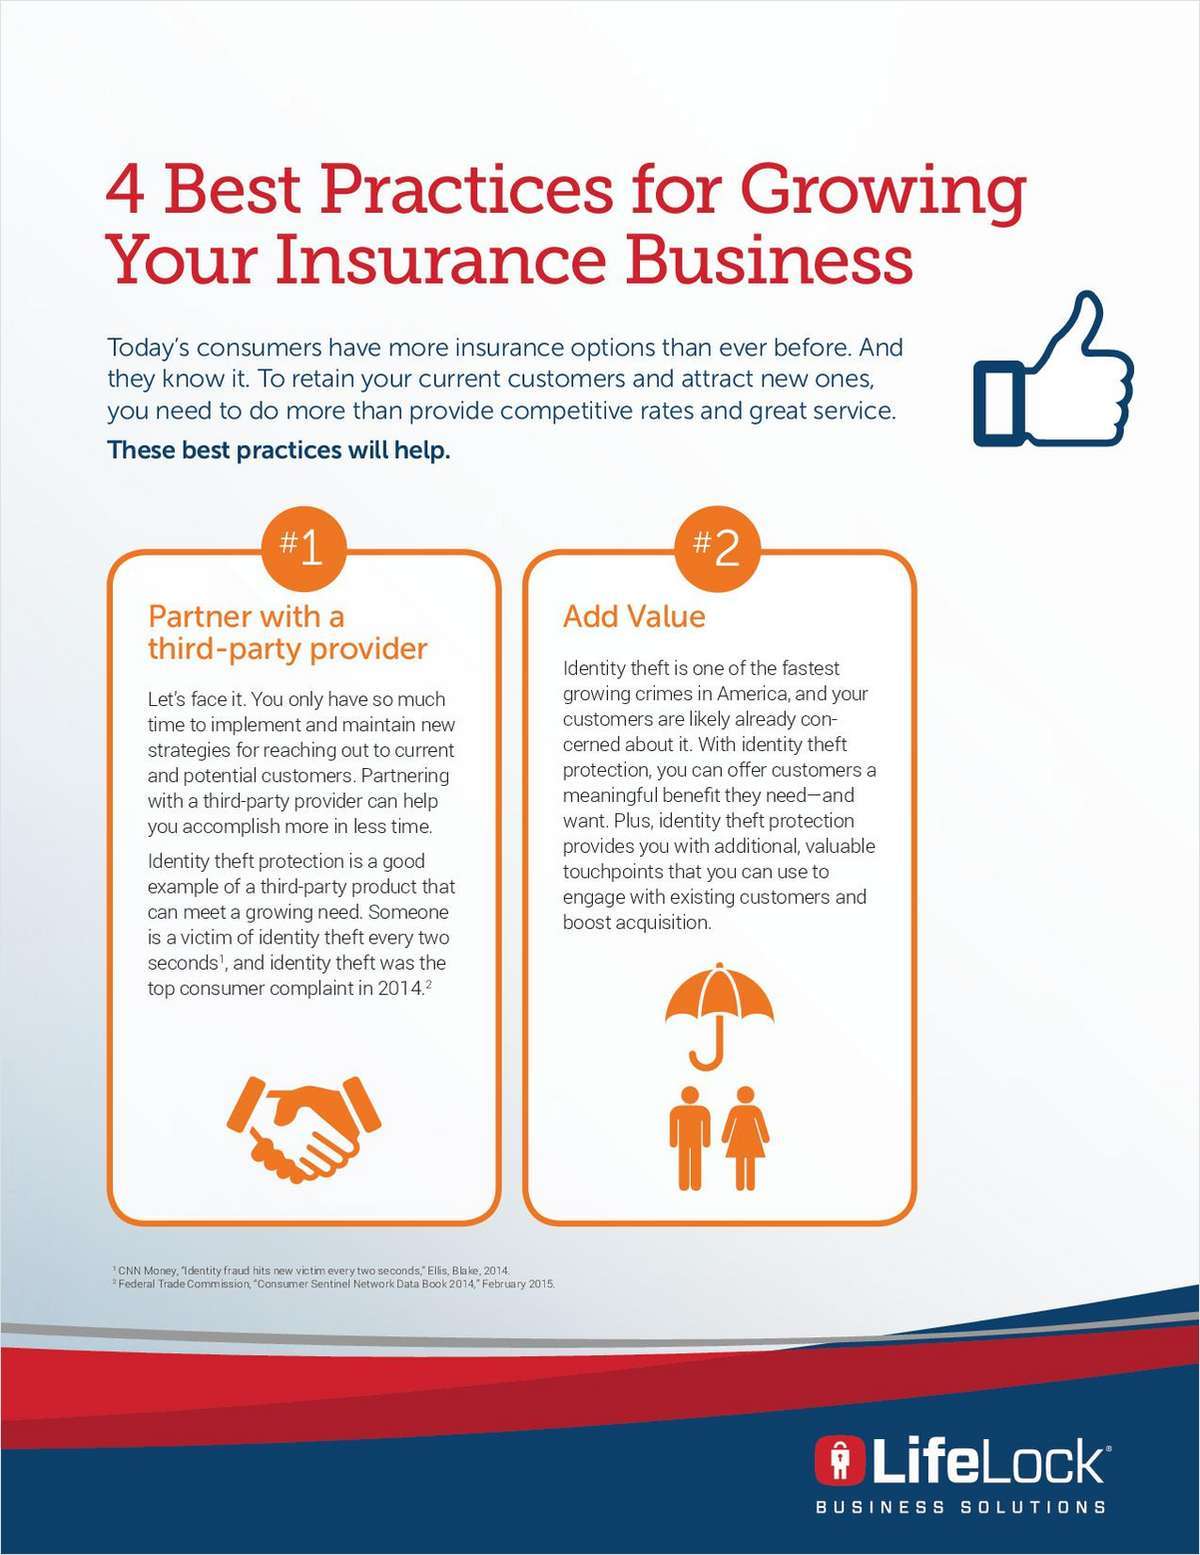 4 Best Practices for Growing Your Insurance Business